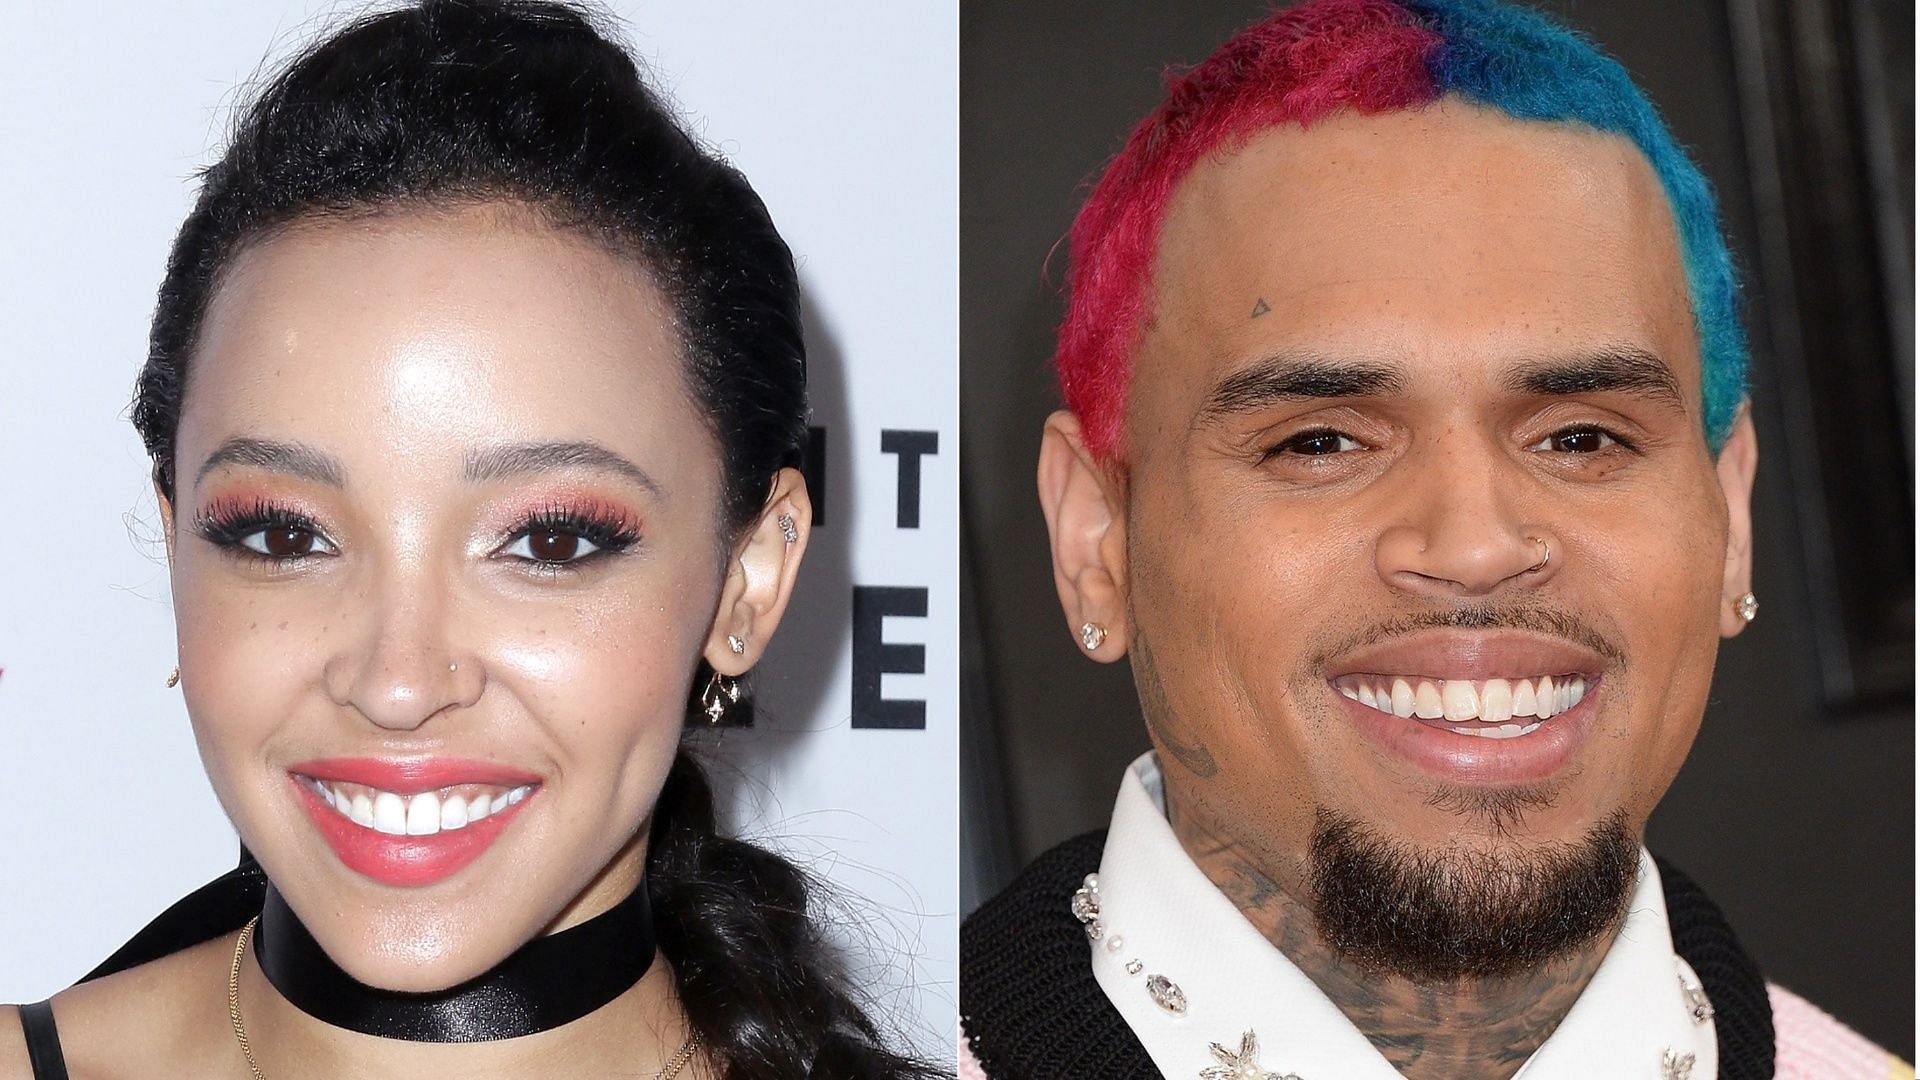 Tinashe recently said that she did not wish to work with Chris Brown, to which the latter took offense. (Image via YouTube)